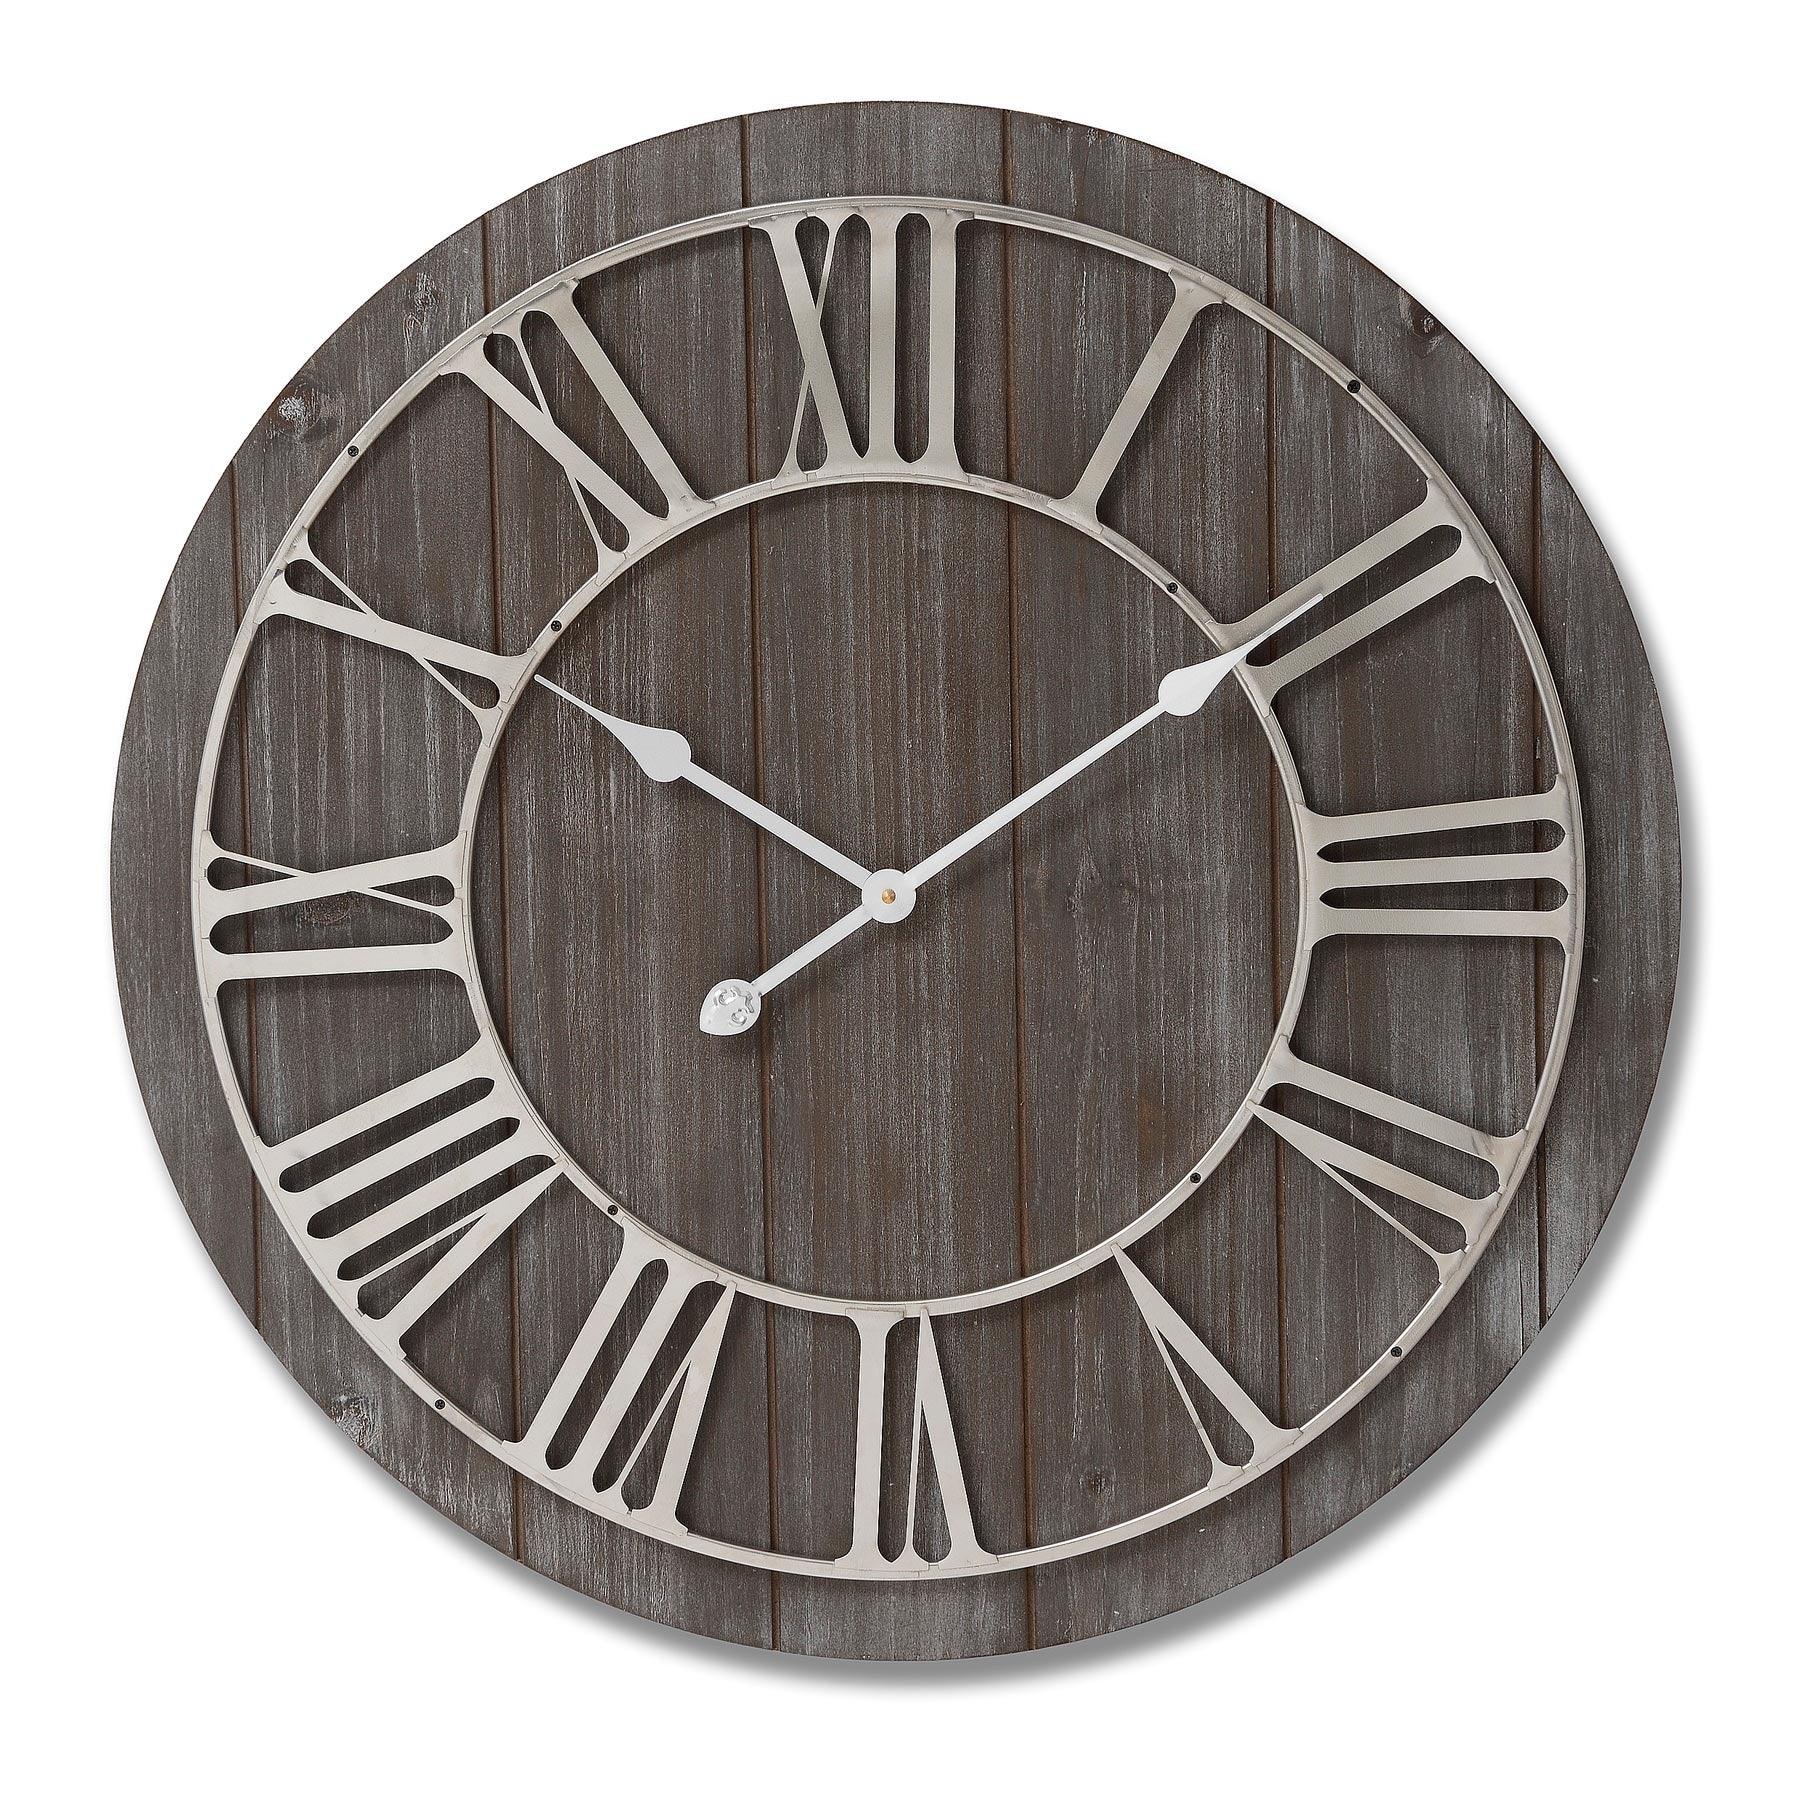 Wooden Clock With Contrasting Nickel Detail - Charming Spaces